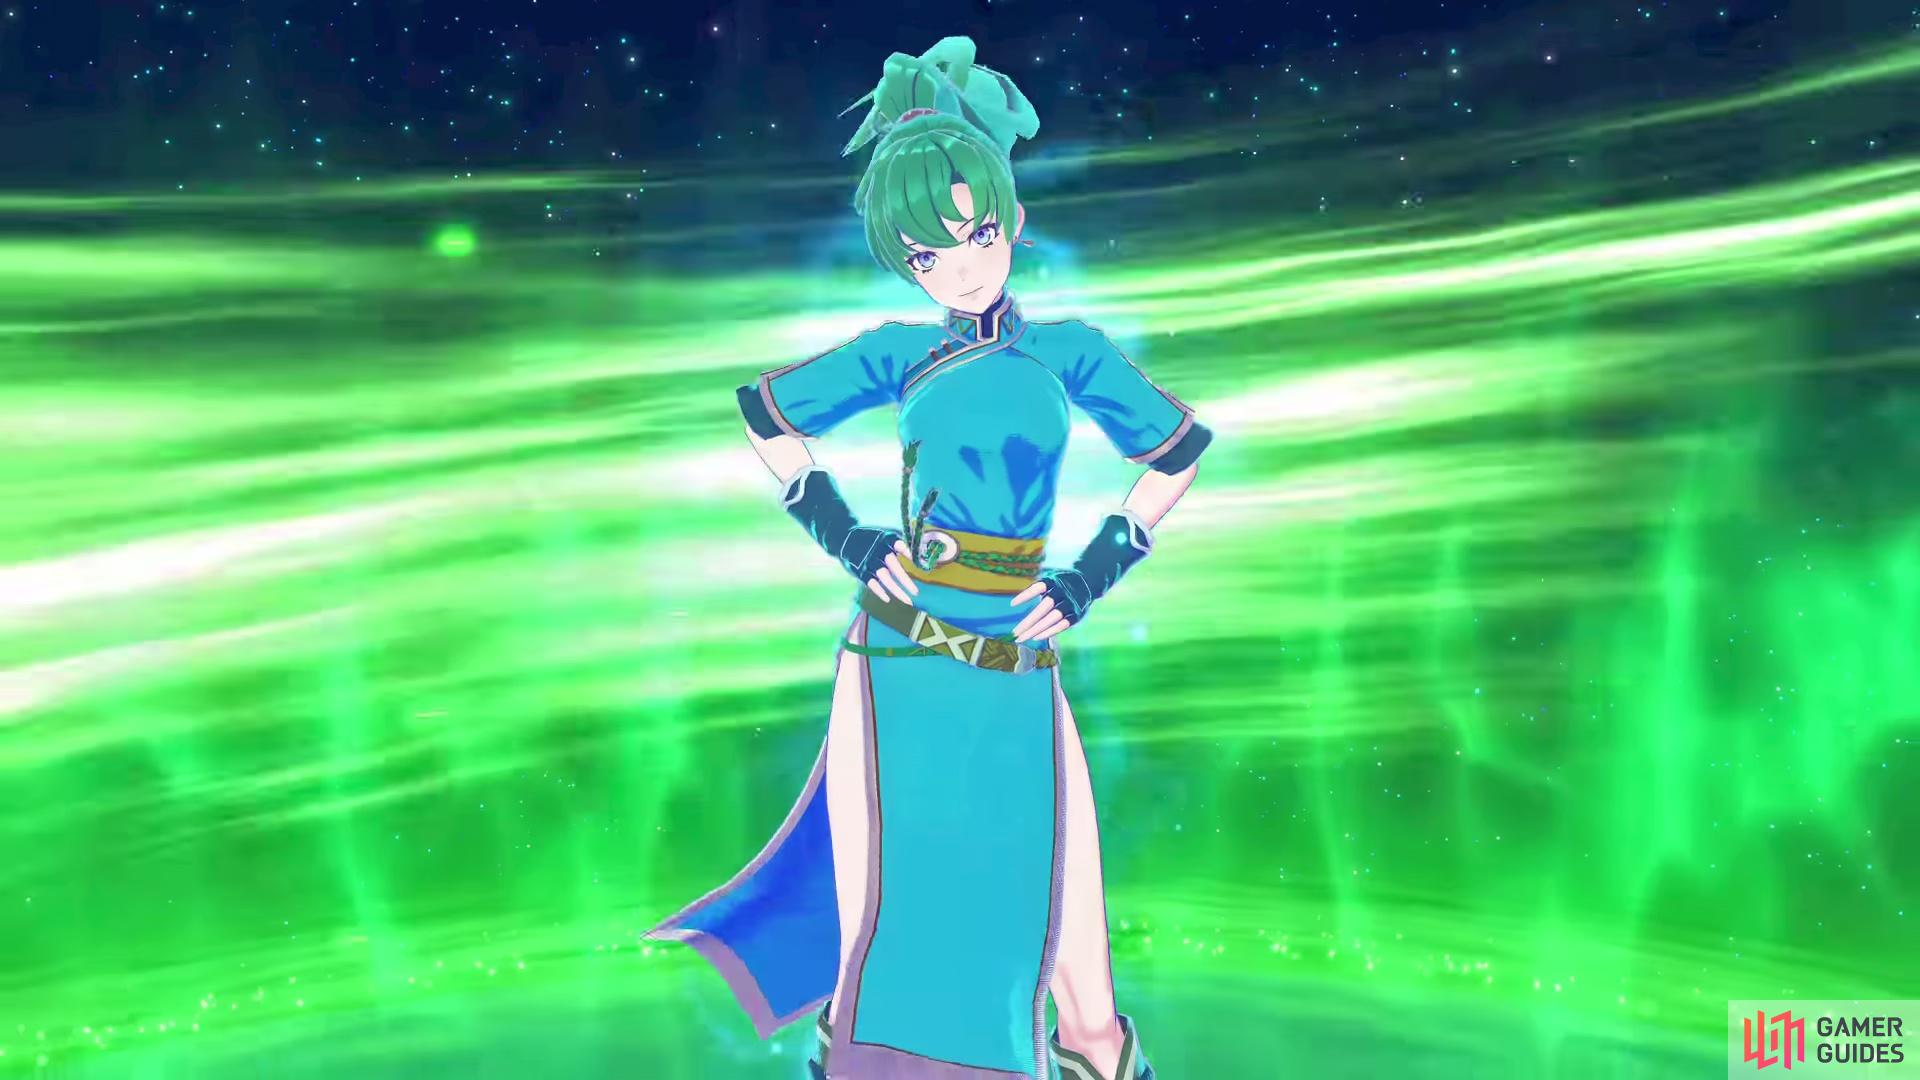 Lyn is just one of the Emblems you'll unlock throughout the game.